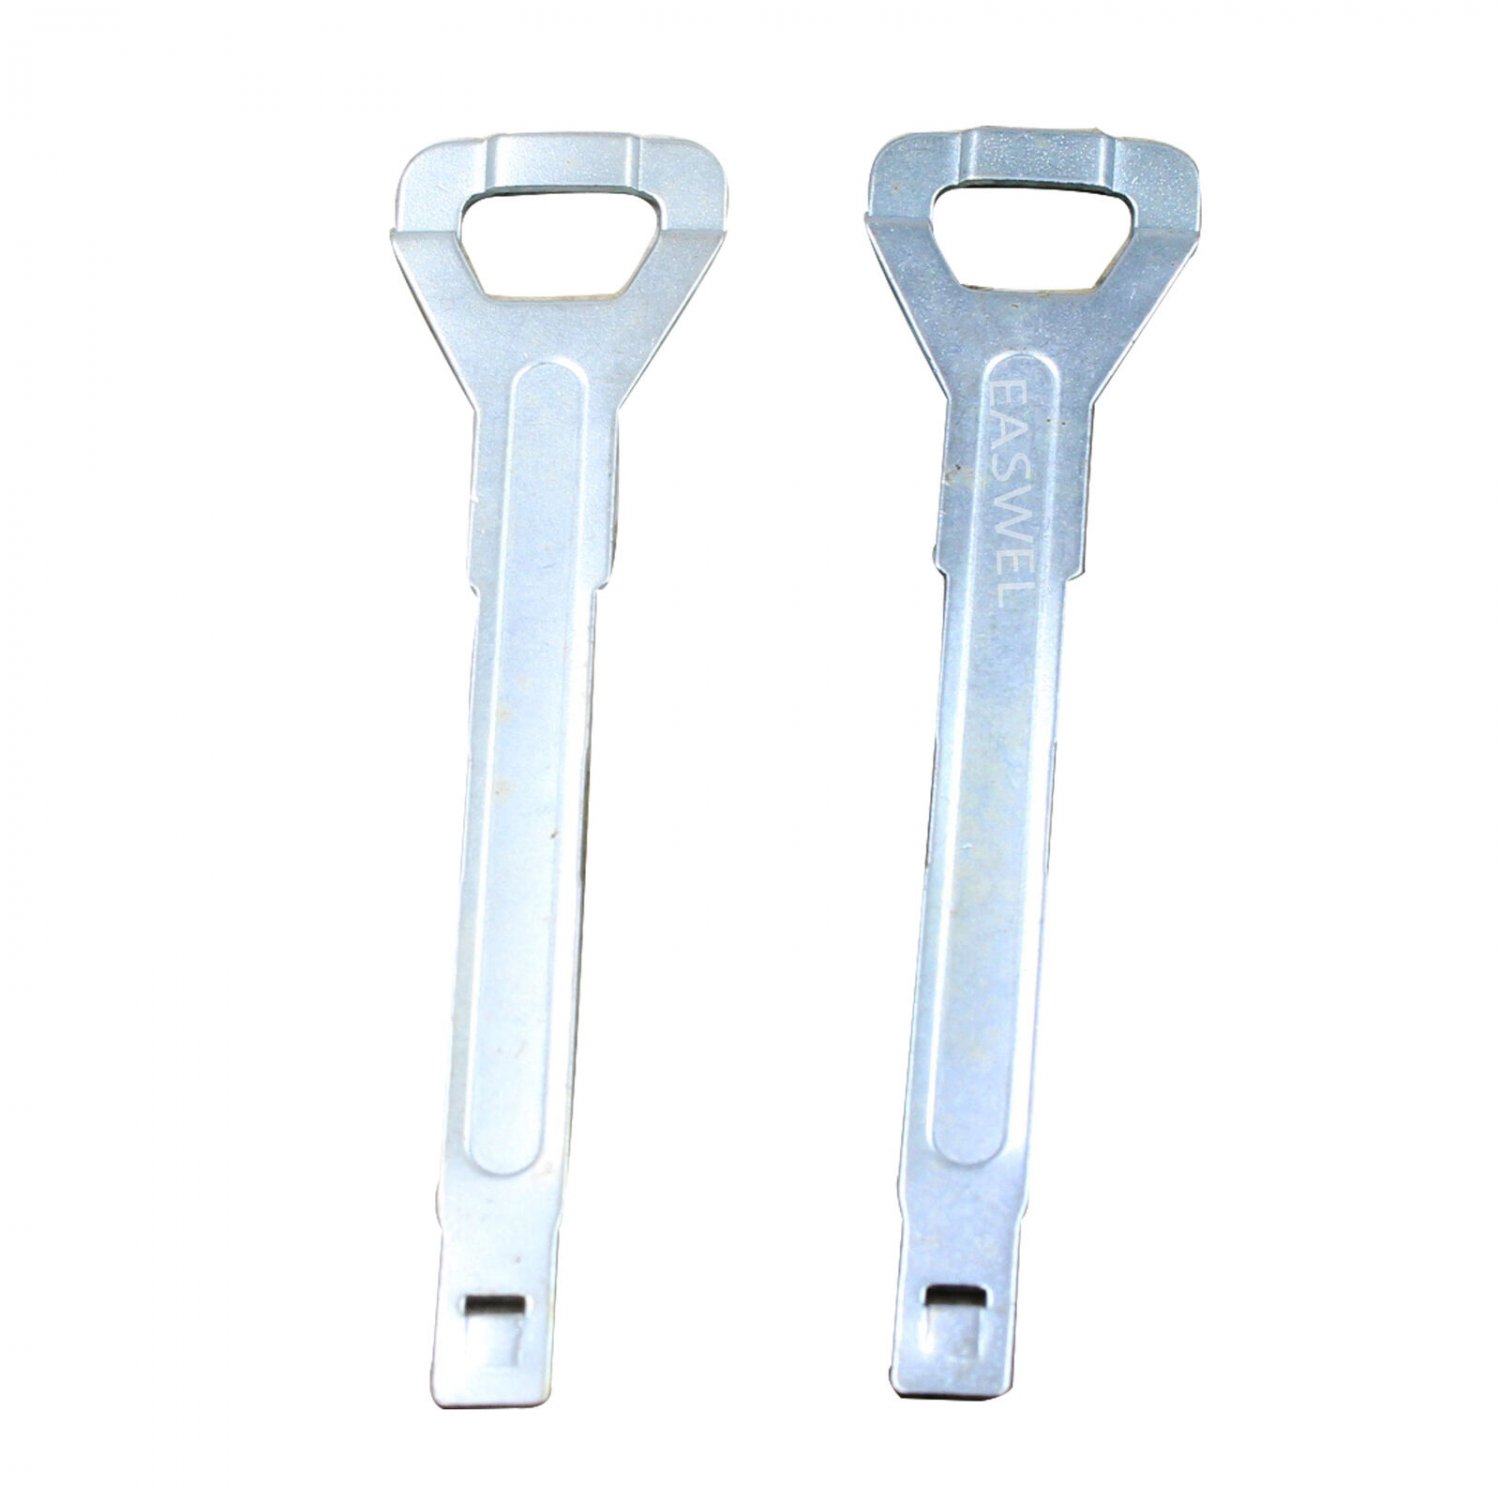 2 pcs Car Radio Removal Tool Keys DIN Release for Sony Series Pin